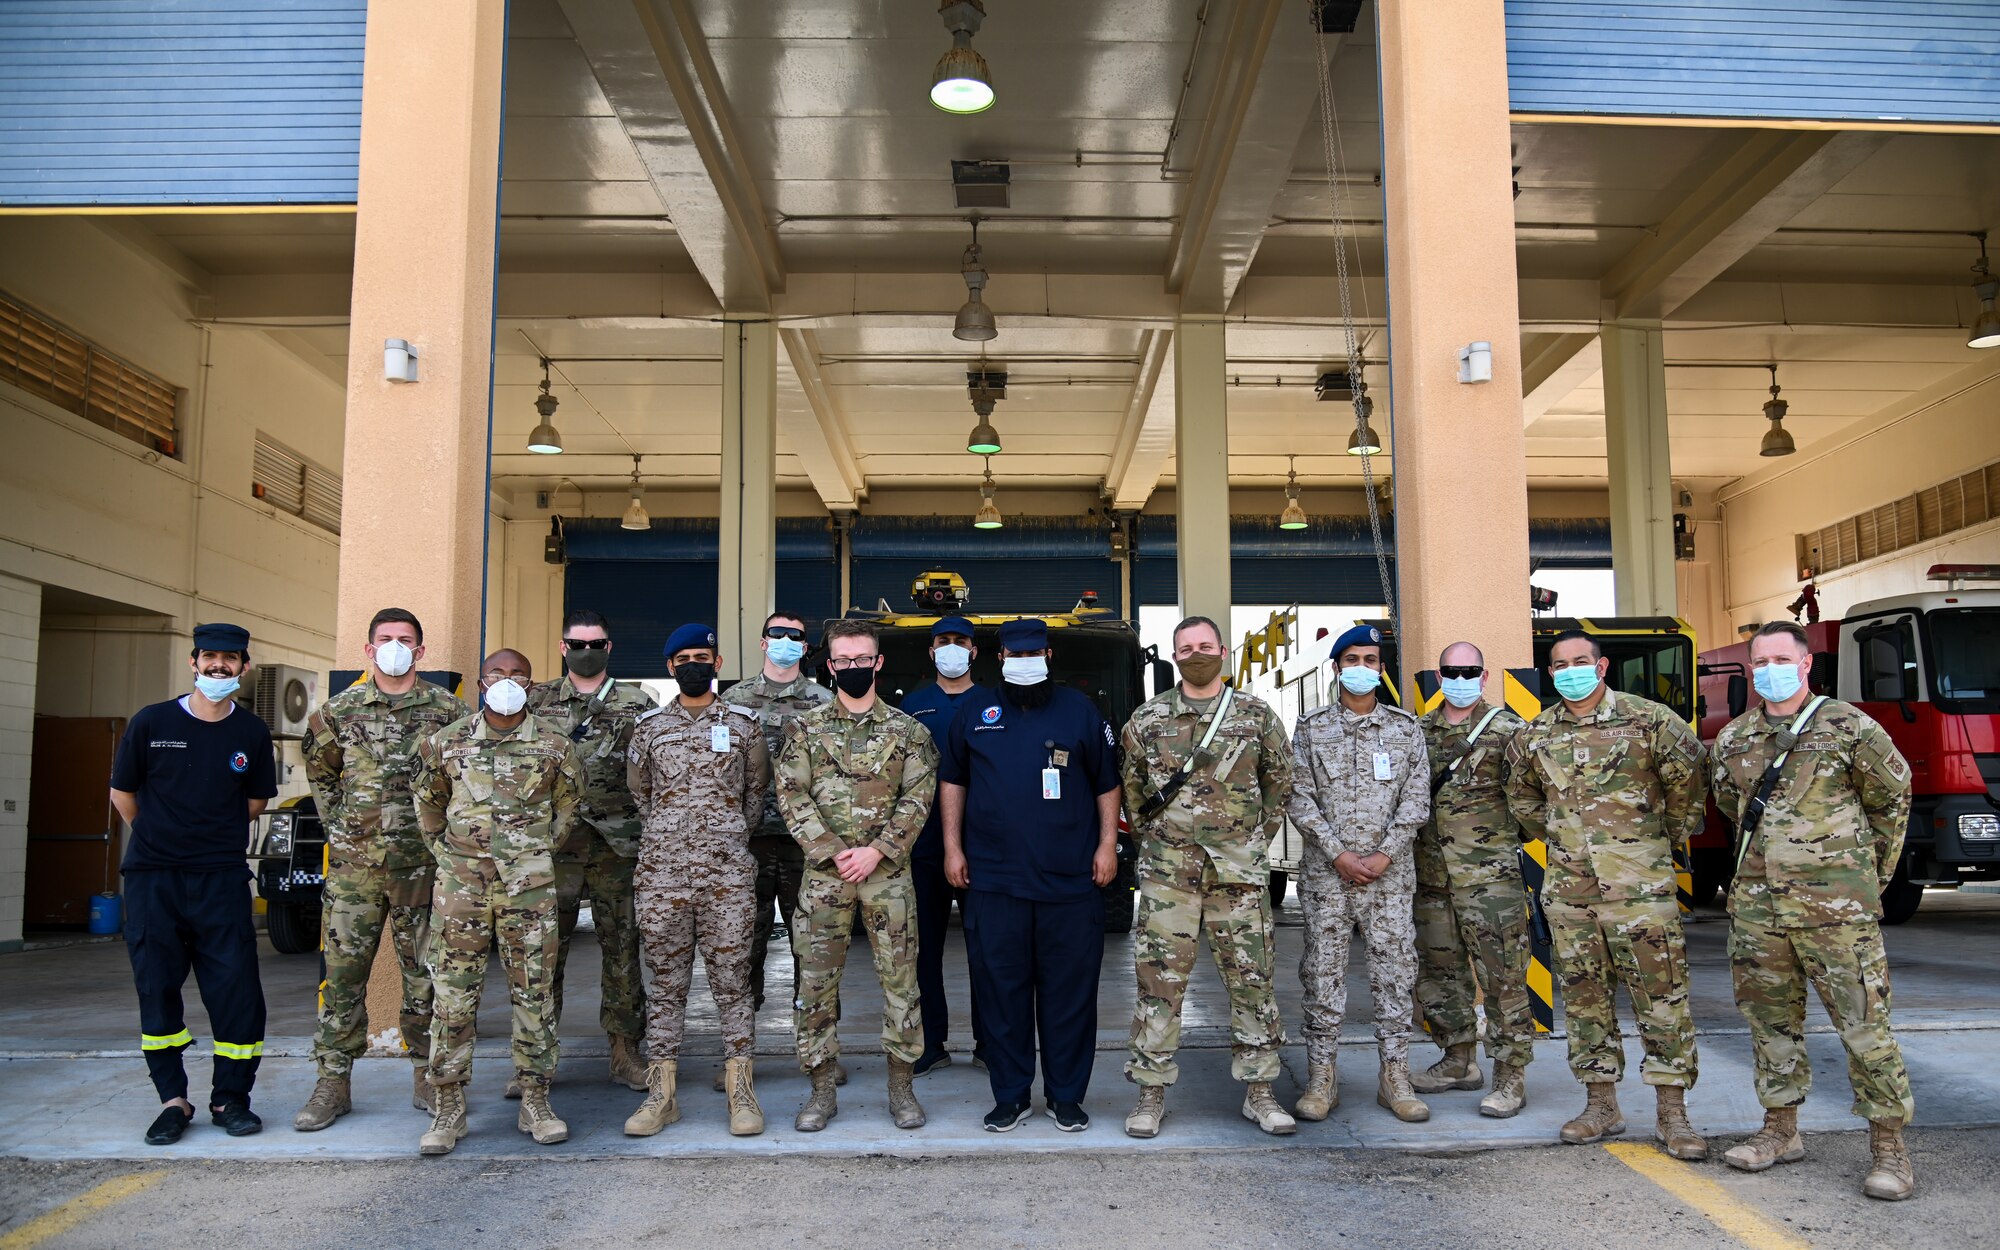 Airmen from the 378th Expeditionary Civil Engineer Squadron fire department and service members from the Royal Saudi Air Force pose for a group photo after an integrated training at Prince Sultan Air Base, Kingdom of Saudi Arabia, Nov. 24, 2021. The training allowed both teams the opportunity to come together to discuss their collective combat capabilities and bolster their international working relationship. (U.S. Air Force photo by Staff Sgt. Christina Graves)